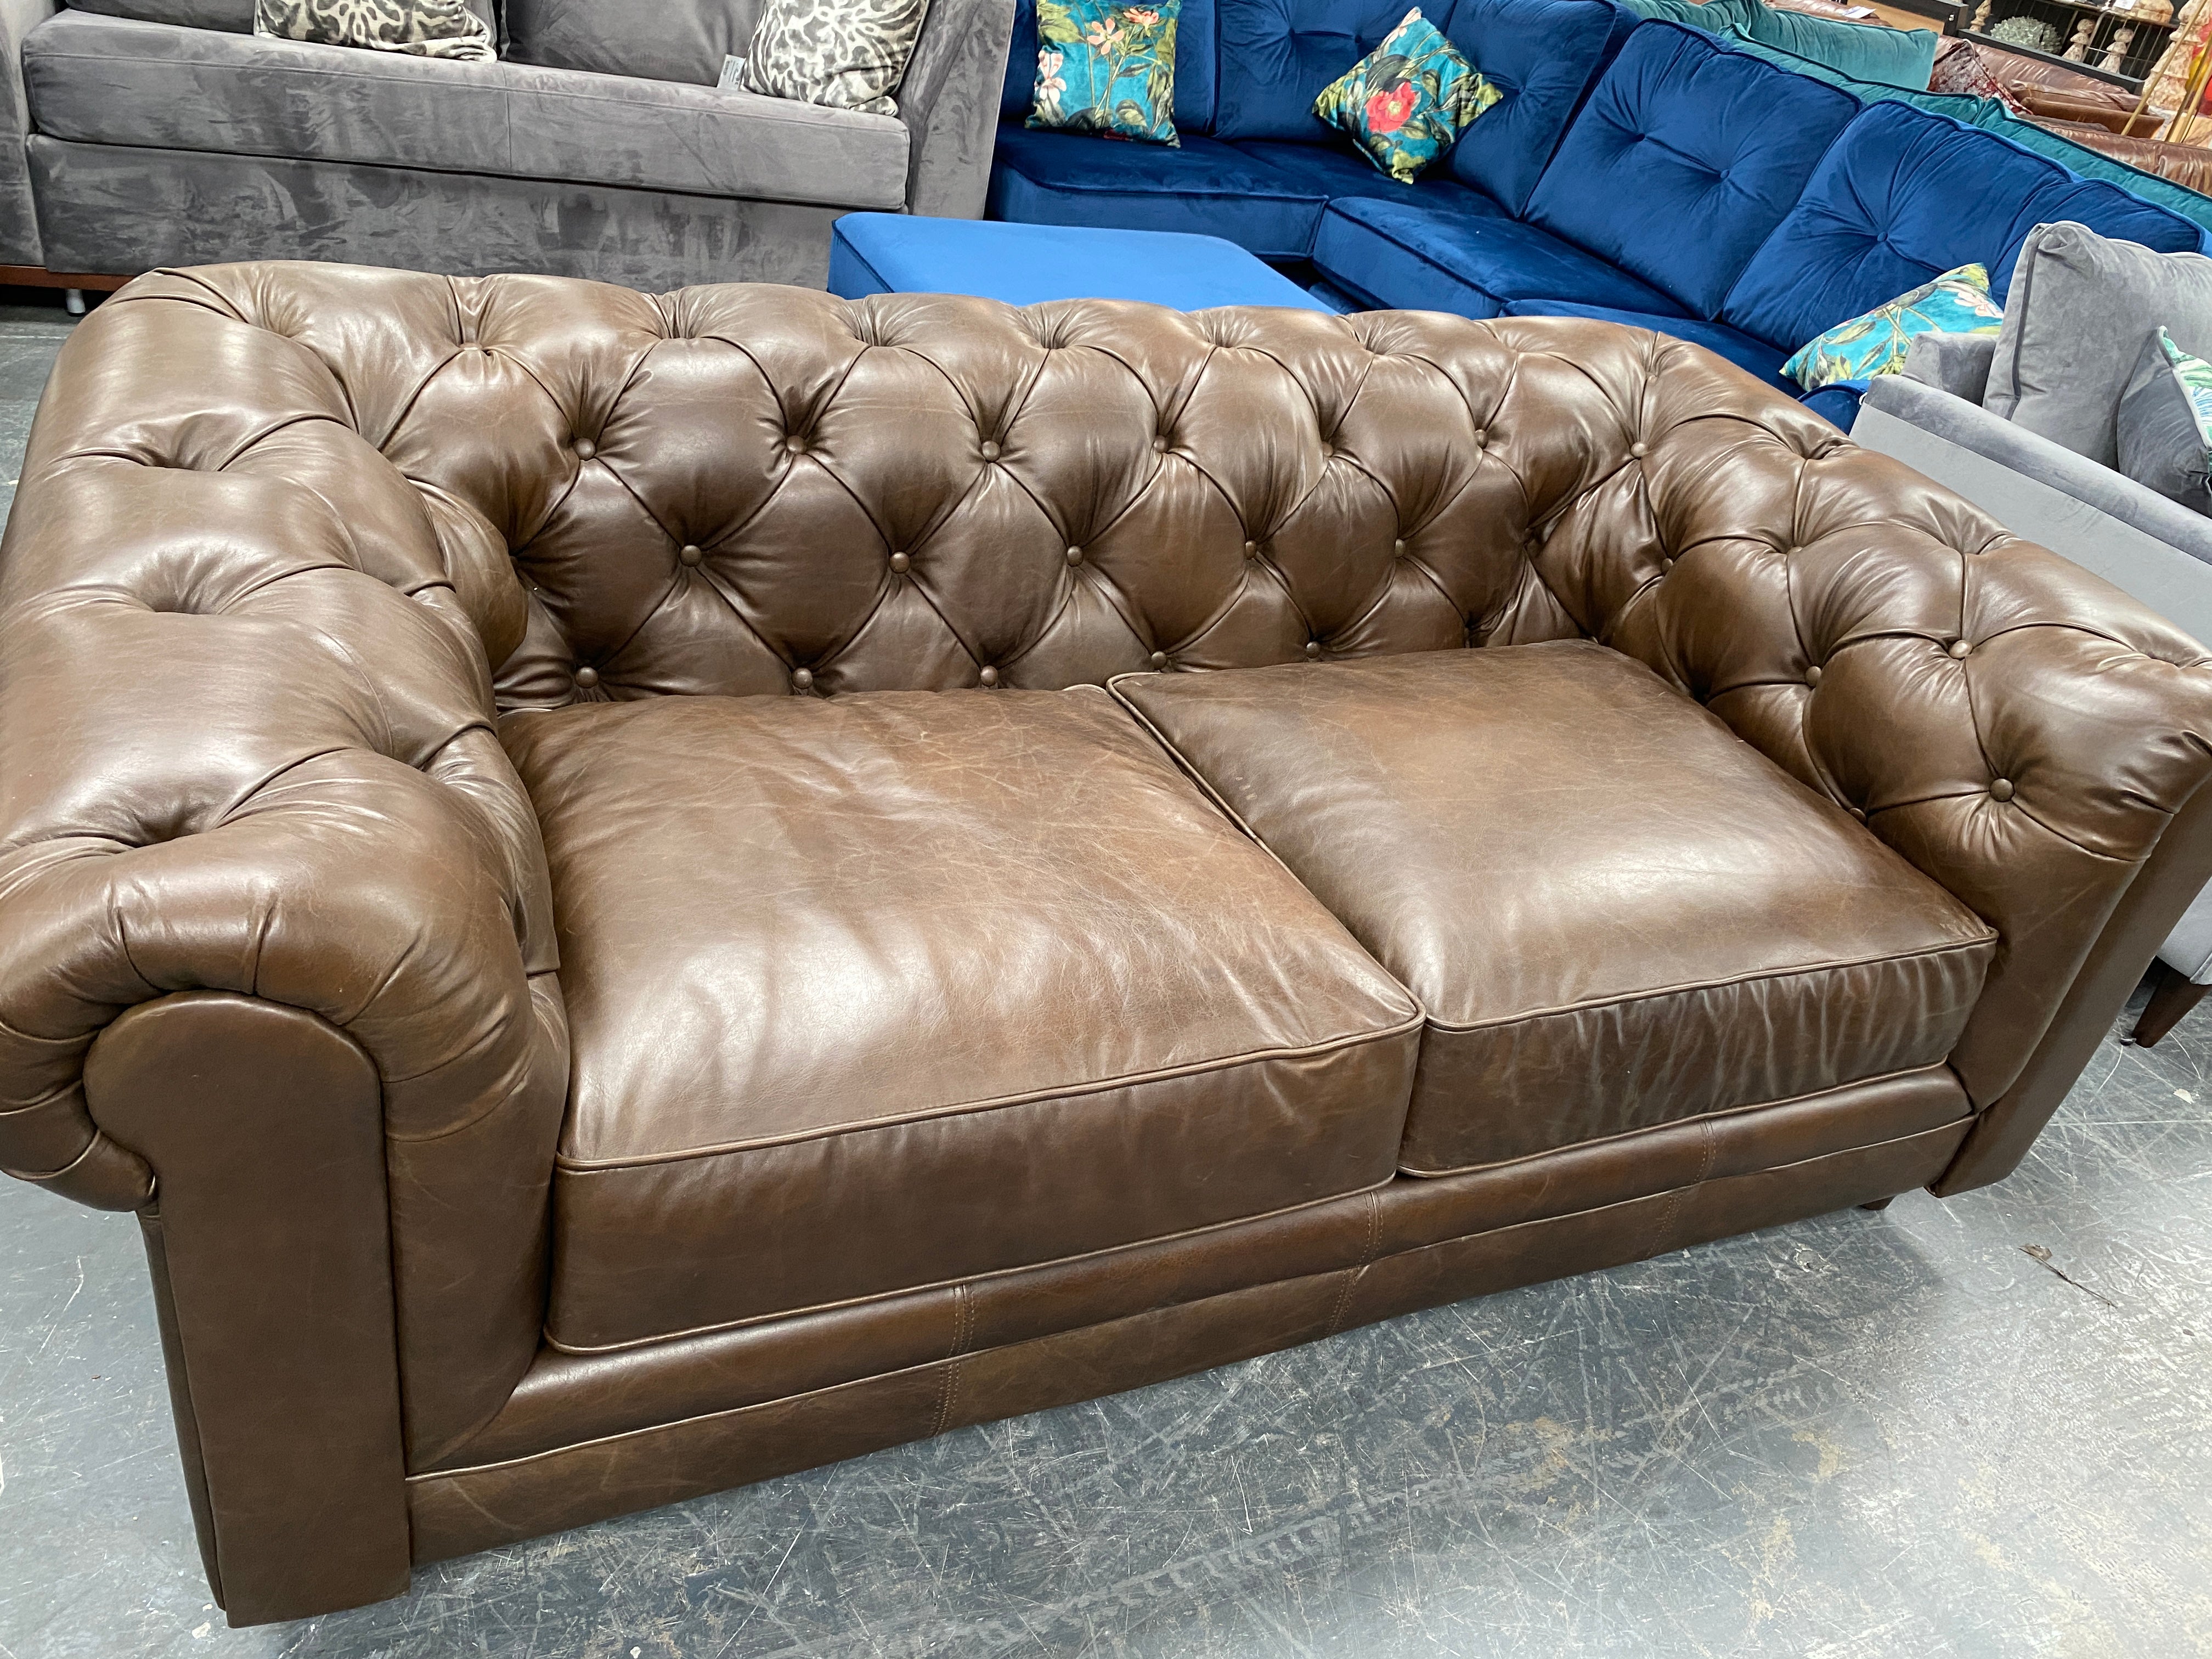 Halo Chesterfield Sofa from Top Secret Furniture